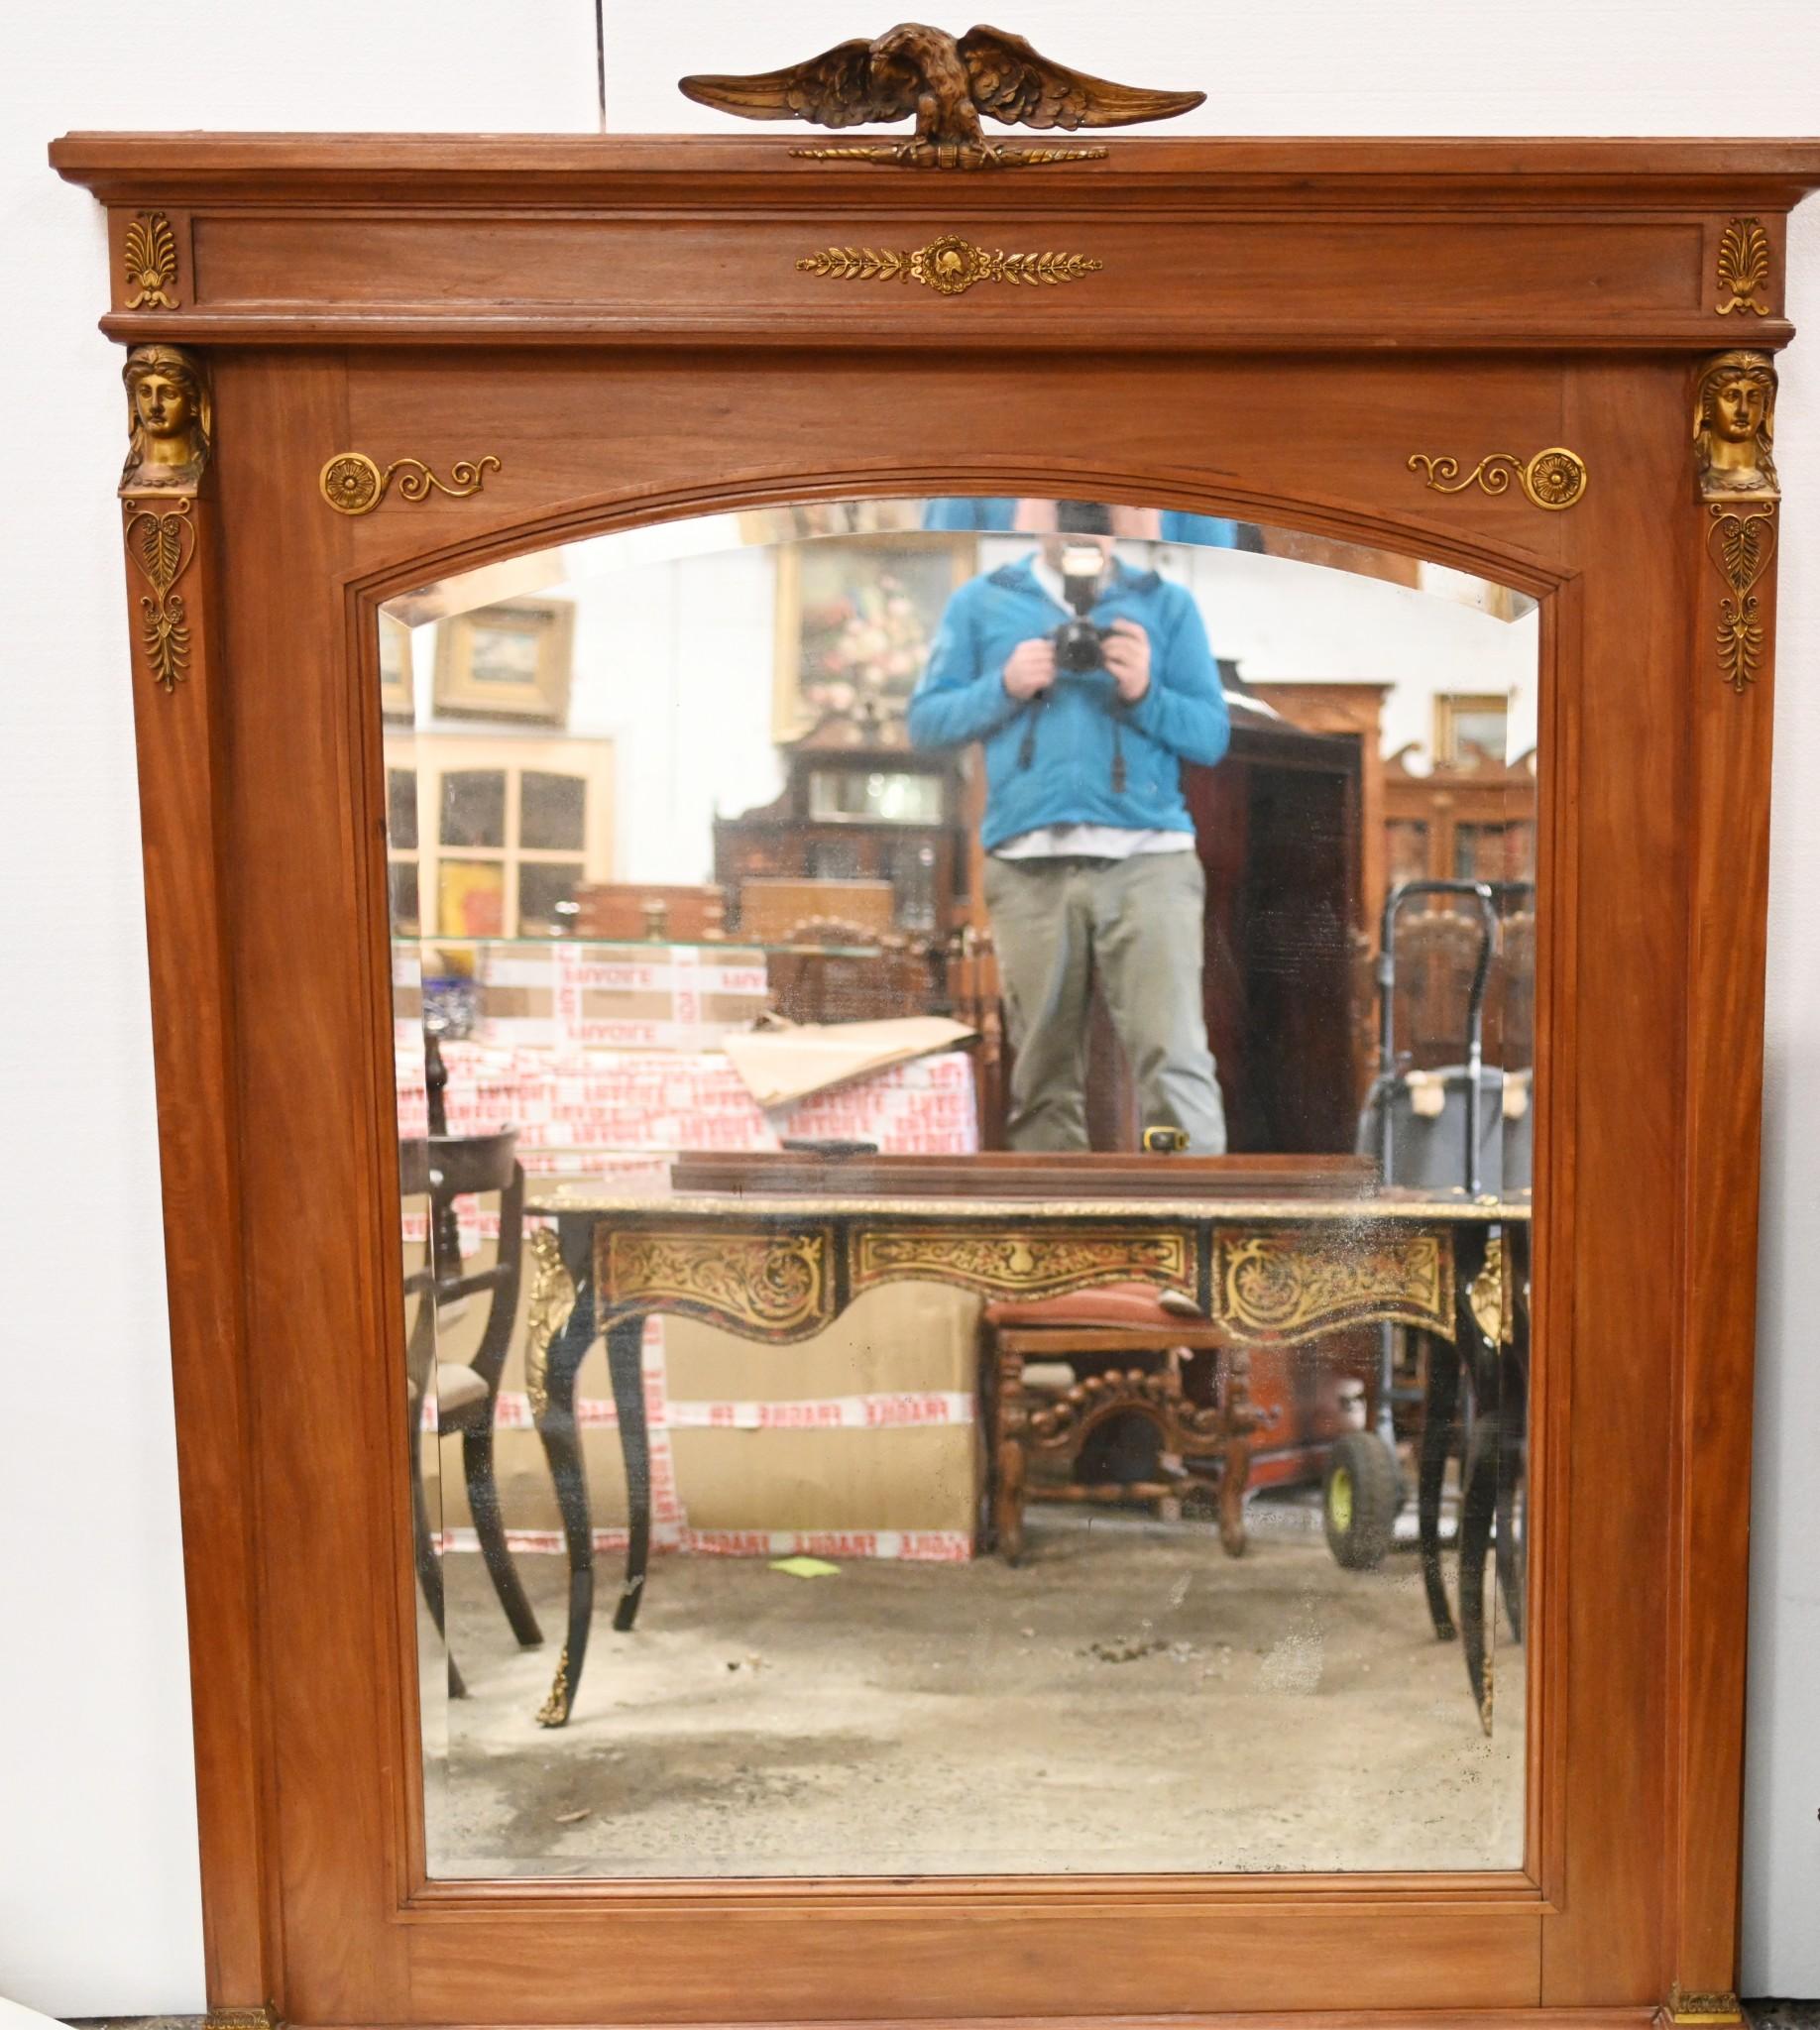 Elegant and refined French Empire overmantle mirror in satinwood
We date this work of art to circa 1840 
Good size at over six feet tall
Gilt fixtures are original and include the pharo head surmounted columns flanking the mirrors
Also acanthus leaf